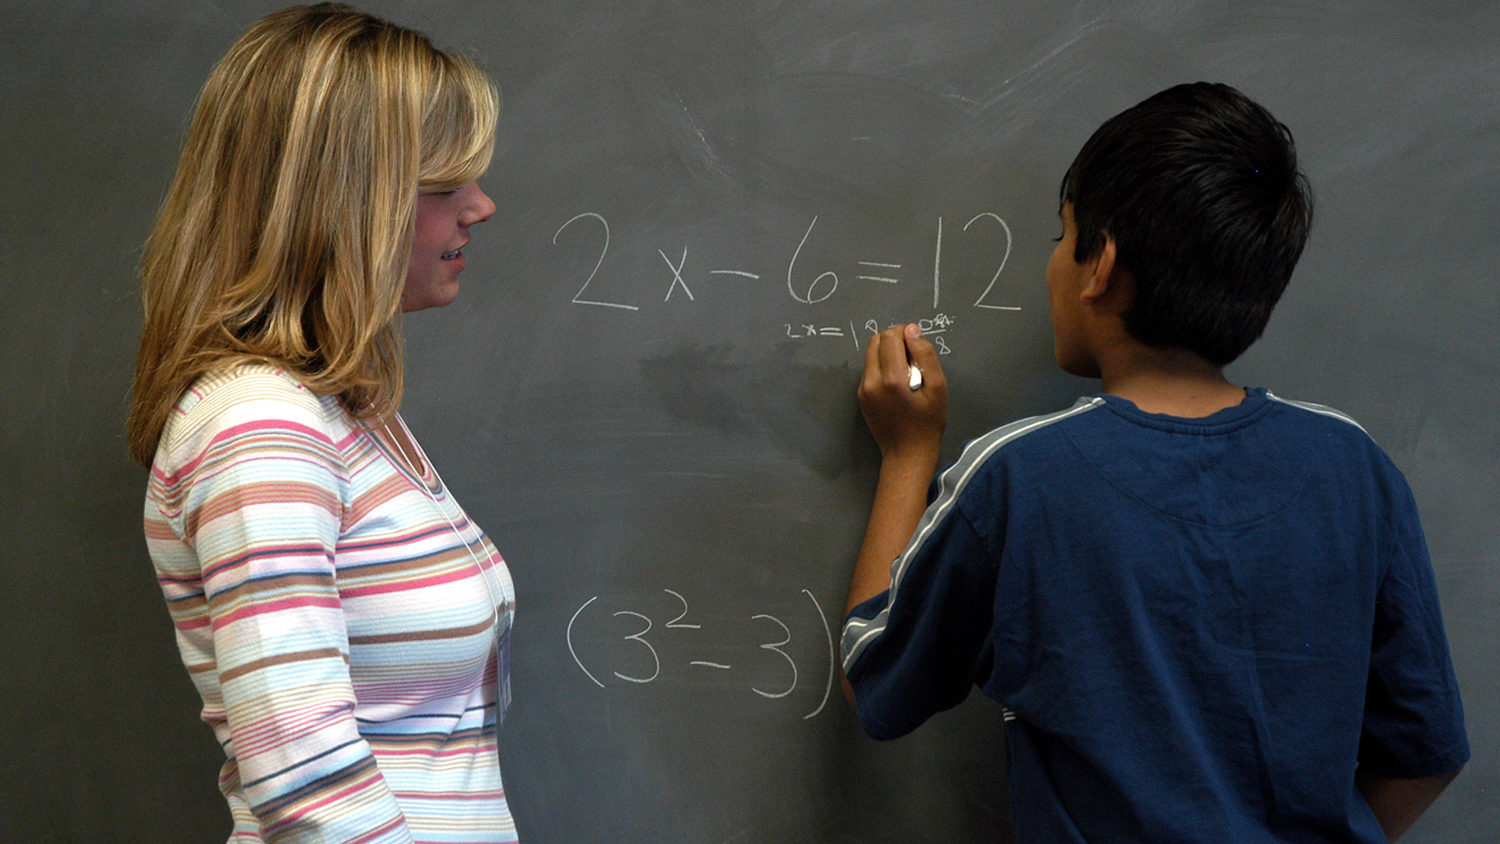 teacher working with student at chalkboard